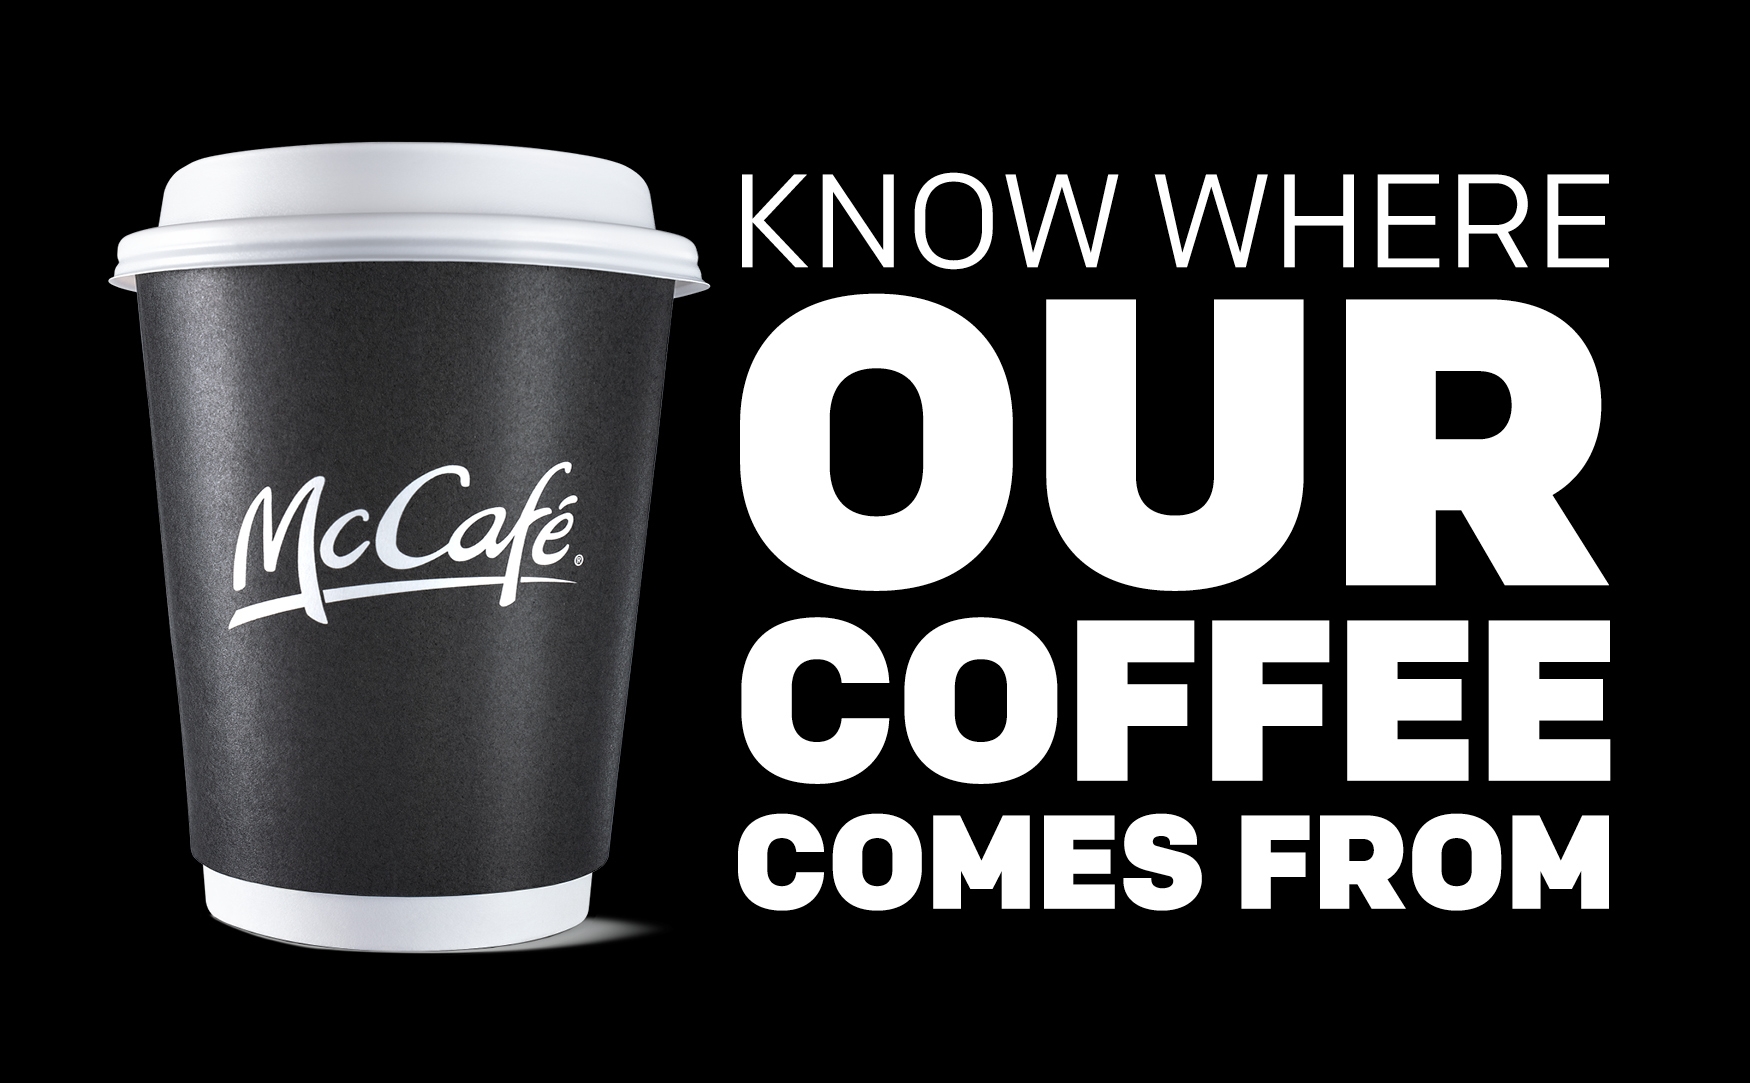 Know Our Food - Know where our coffee comes from.